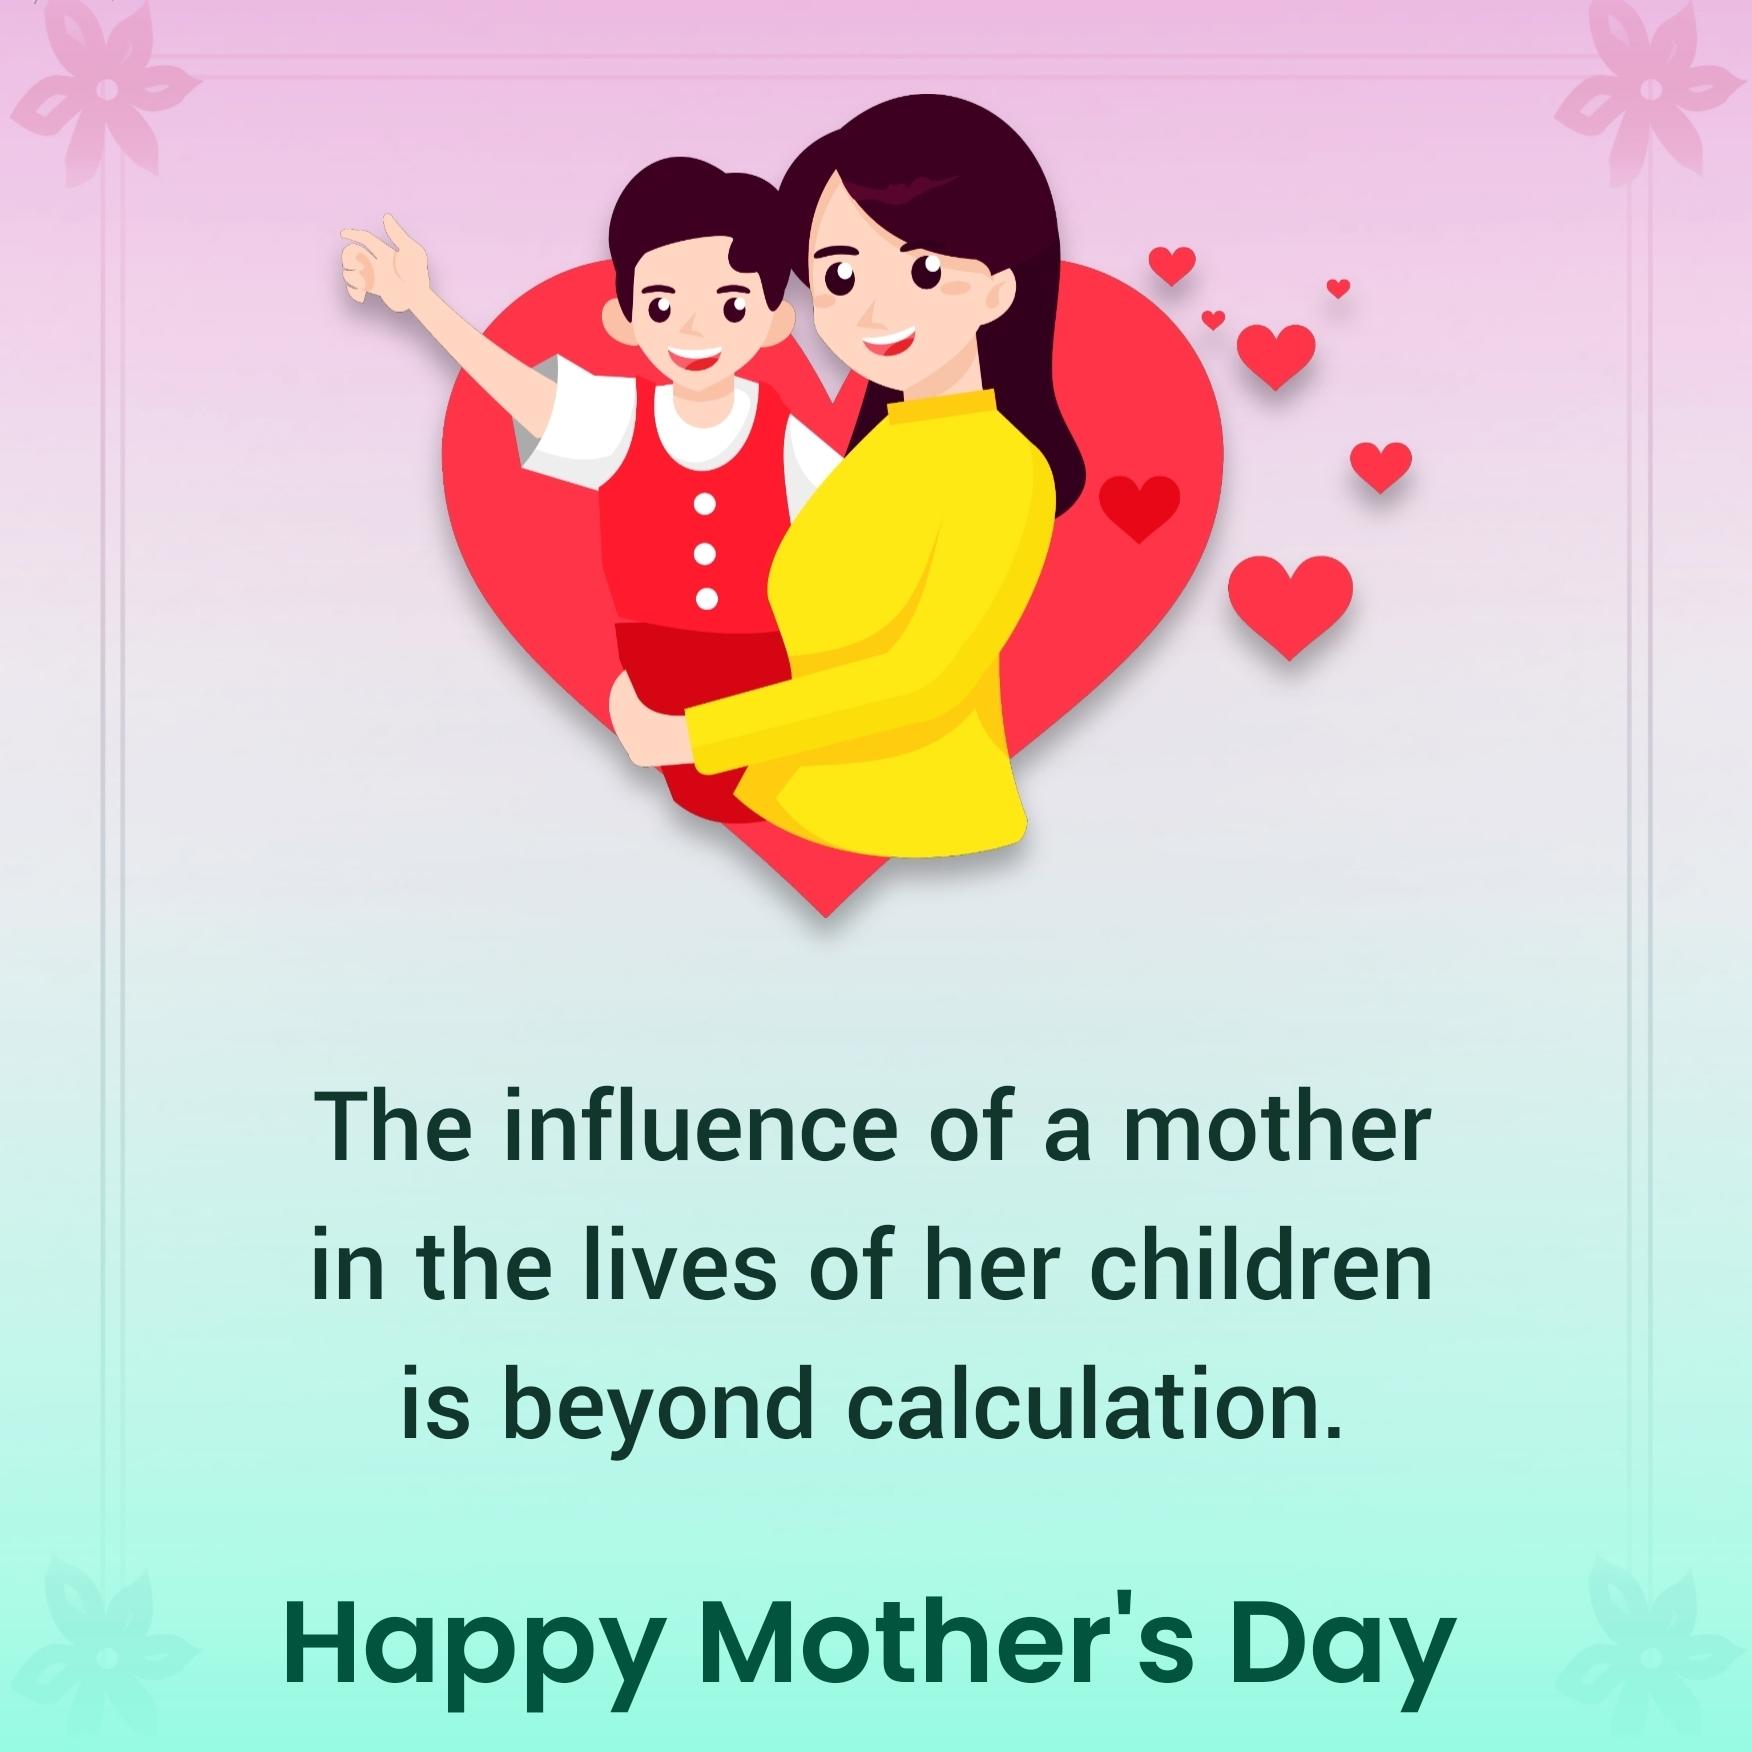 The influence of a mother in the lives of her children